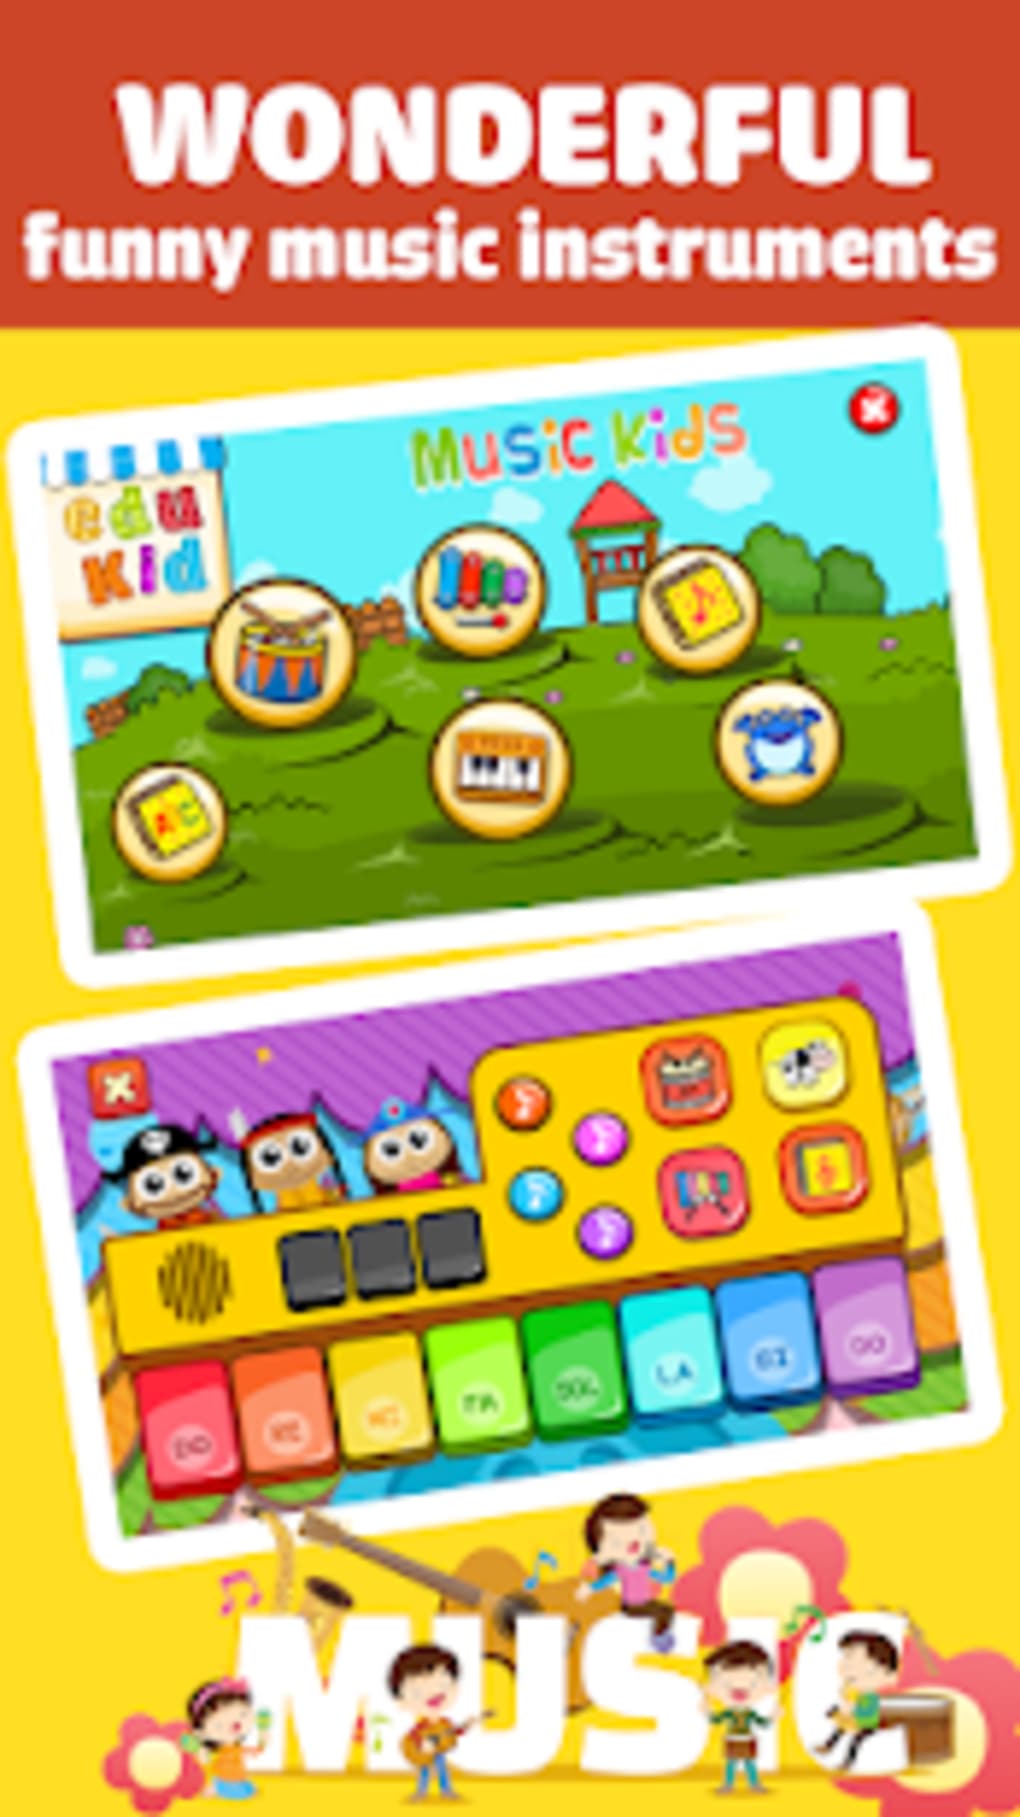 Download Piano Kids - Music & Songs on PC with MEmu